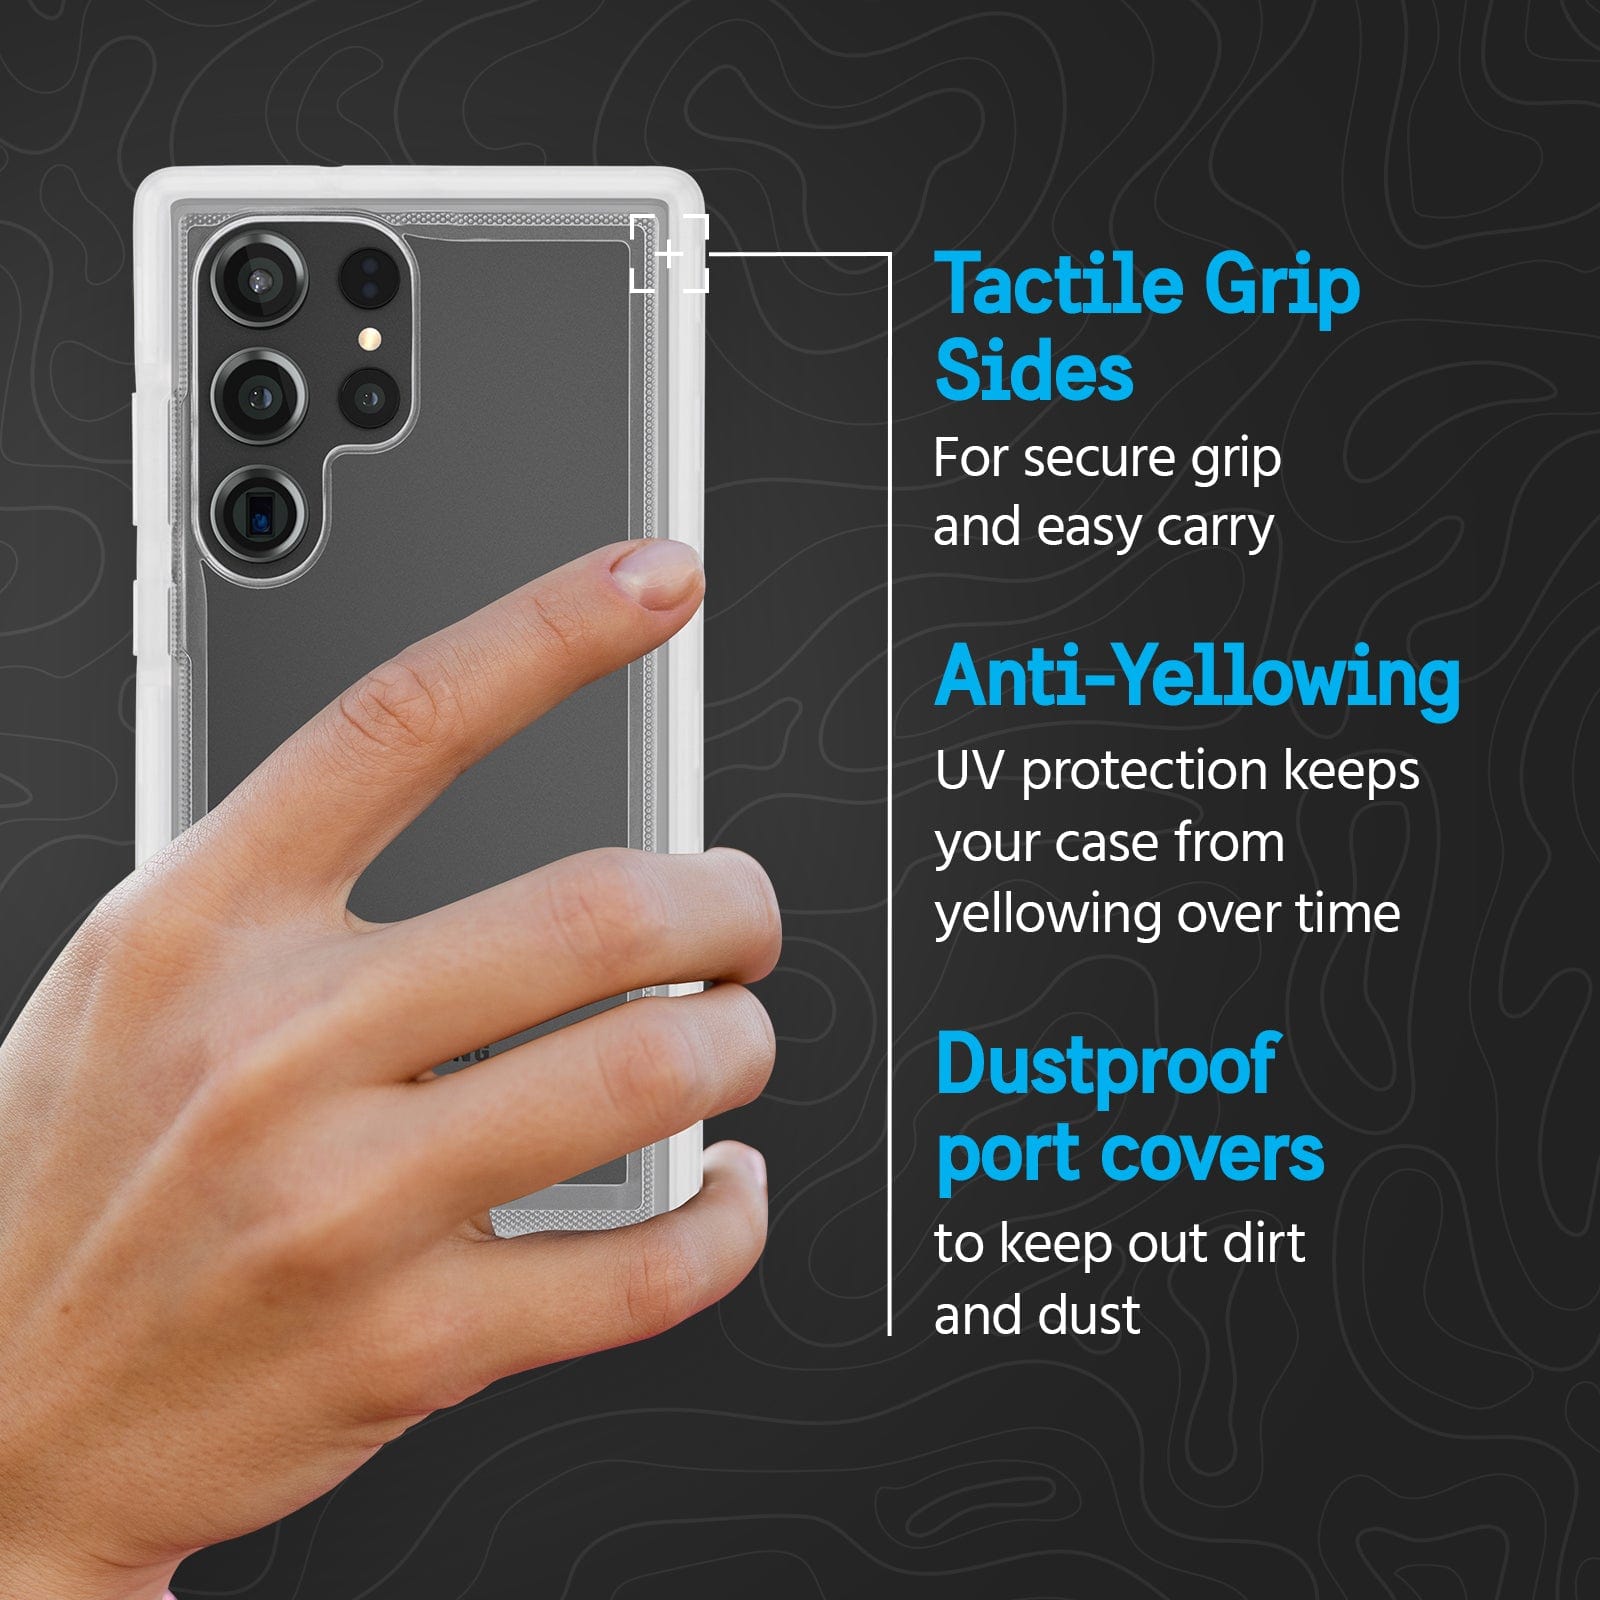 TACTILE GRIP SIDES. FOR SECURE GRIP AND EASY CARRY. ANTI-YELLOWING UV PROTECTION KEEPS YOUR CASE FROM YELLOWING OVER TIME. DUSTPROOF PORT COVERS TO KEEP OUT FIRL AND DUST